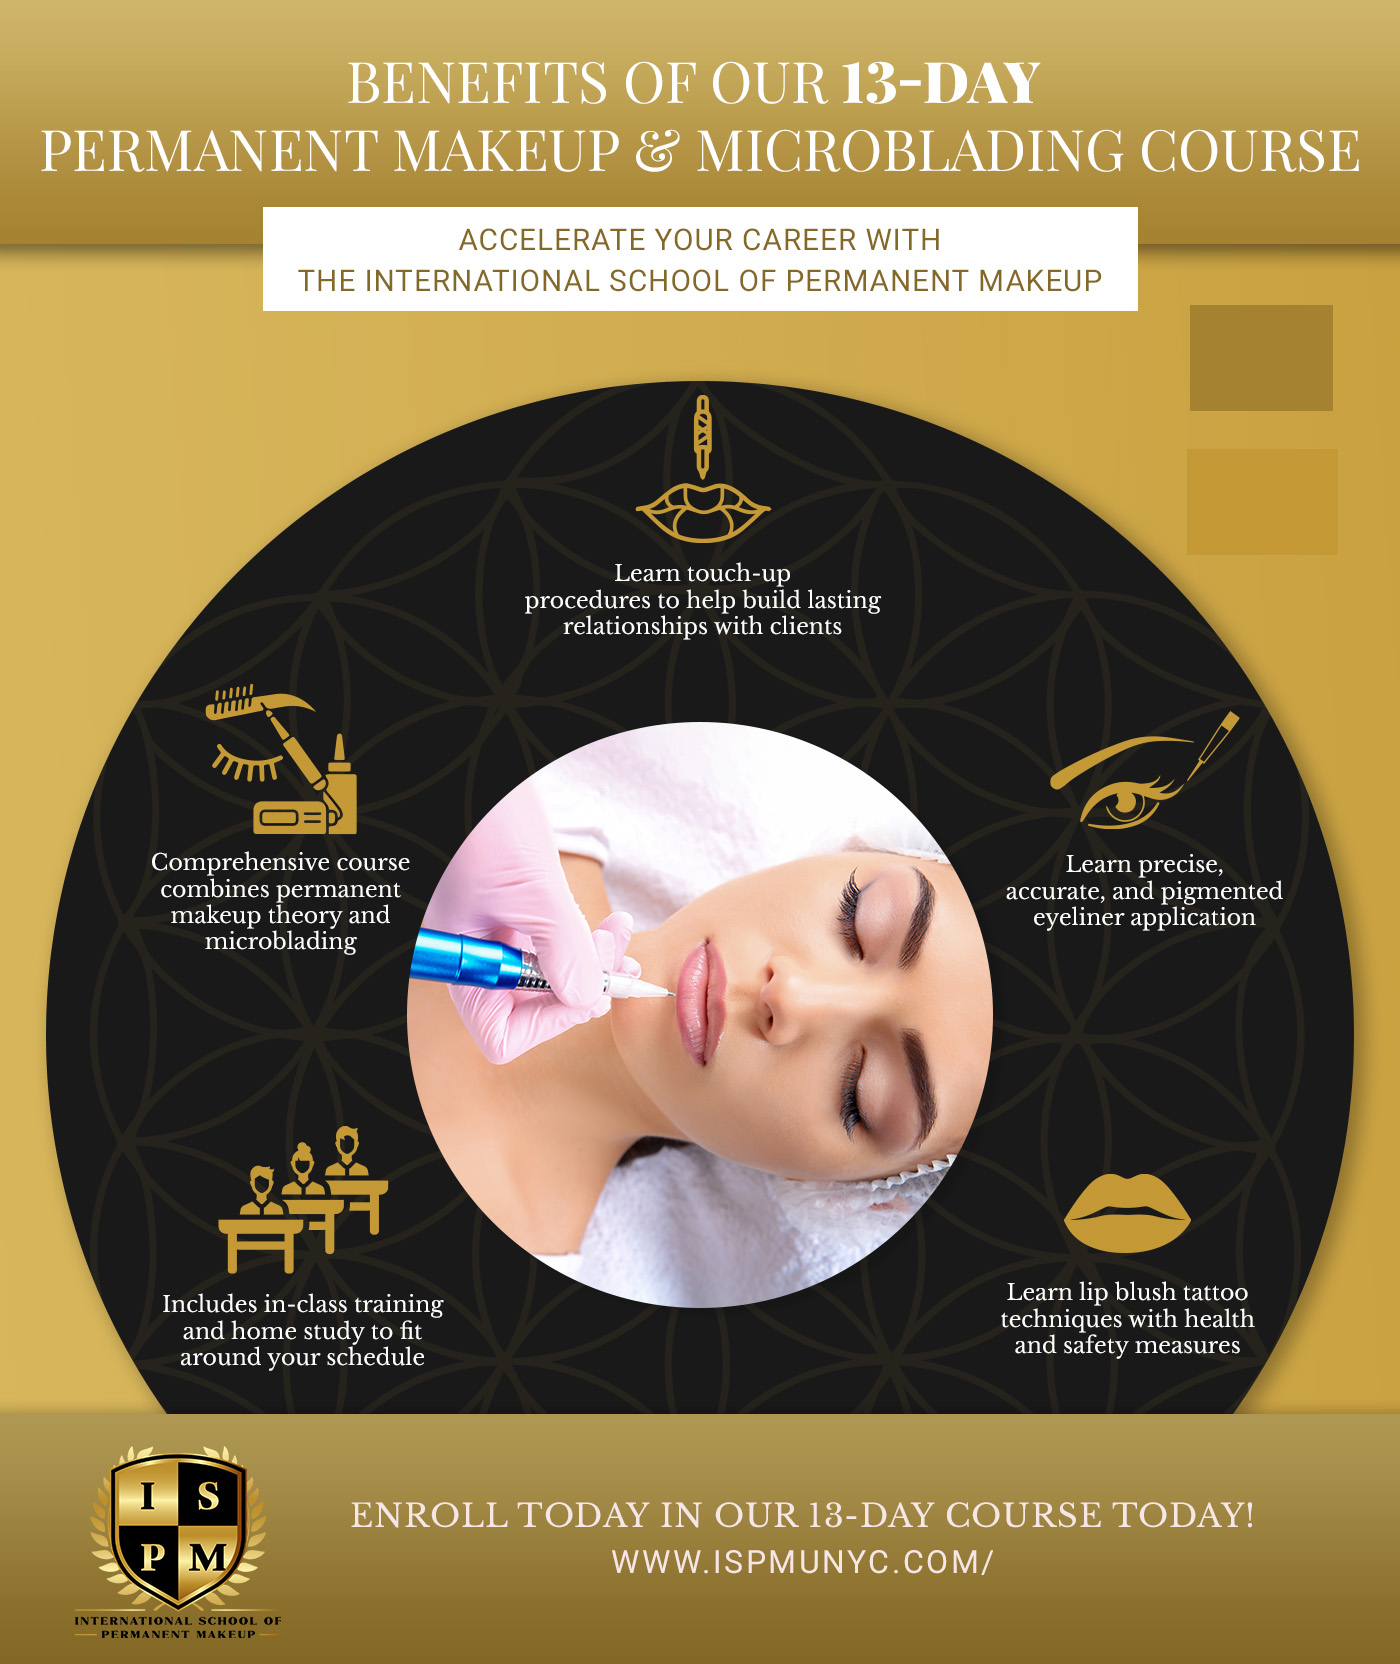 Benefits of Our 13-Day Permanent Makeup And Microblading Course